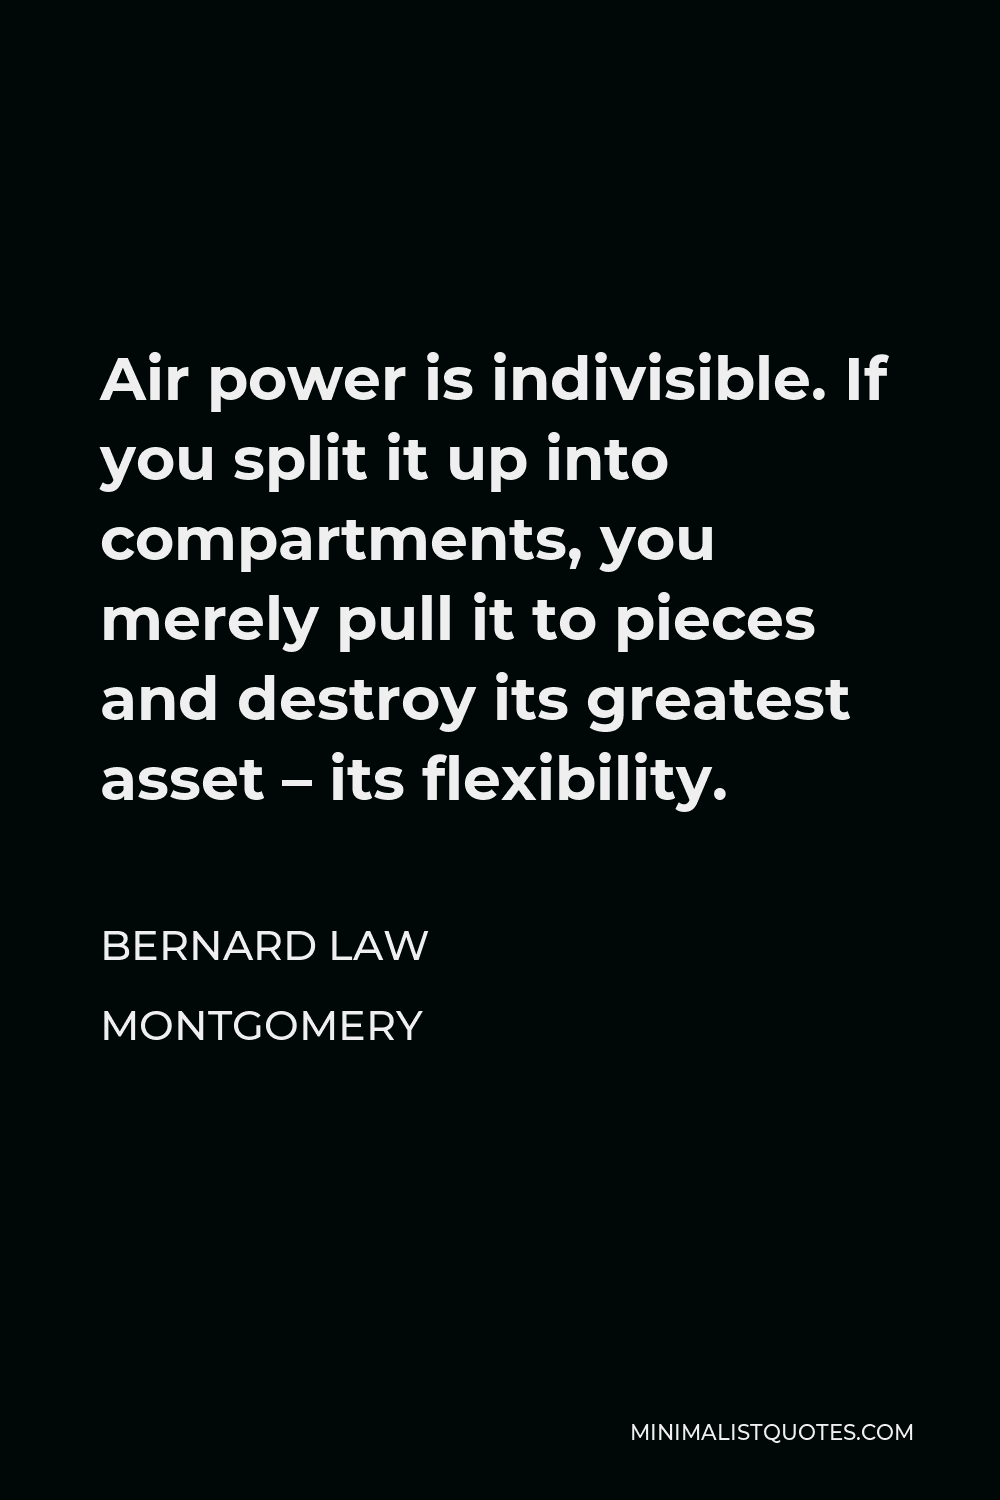 Bernard Law Montgomery Quote - Air power is indivisible. If you split it up into compartments, you merely pull it to pieces and destroy its greatest asset – its flexibility.